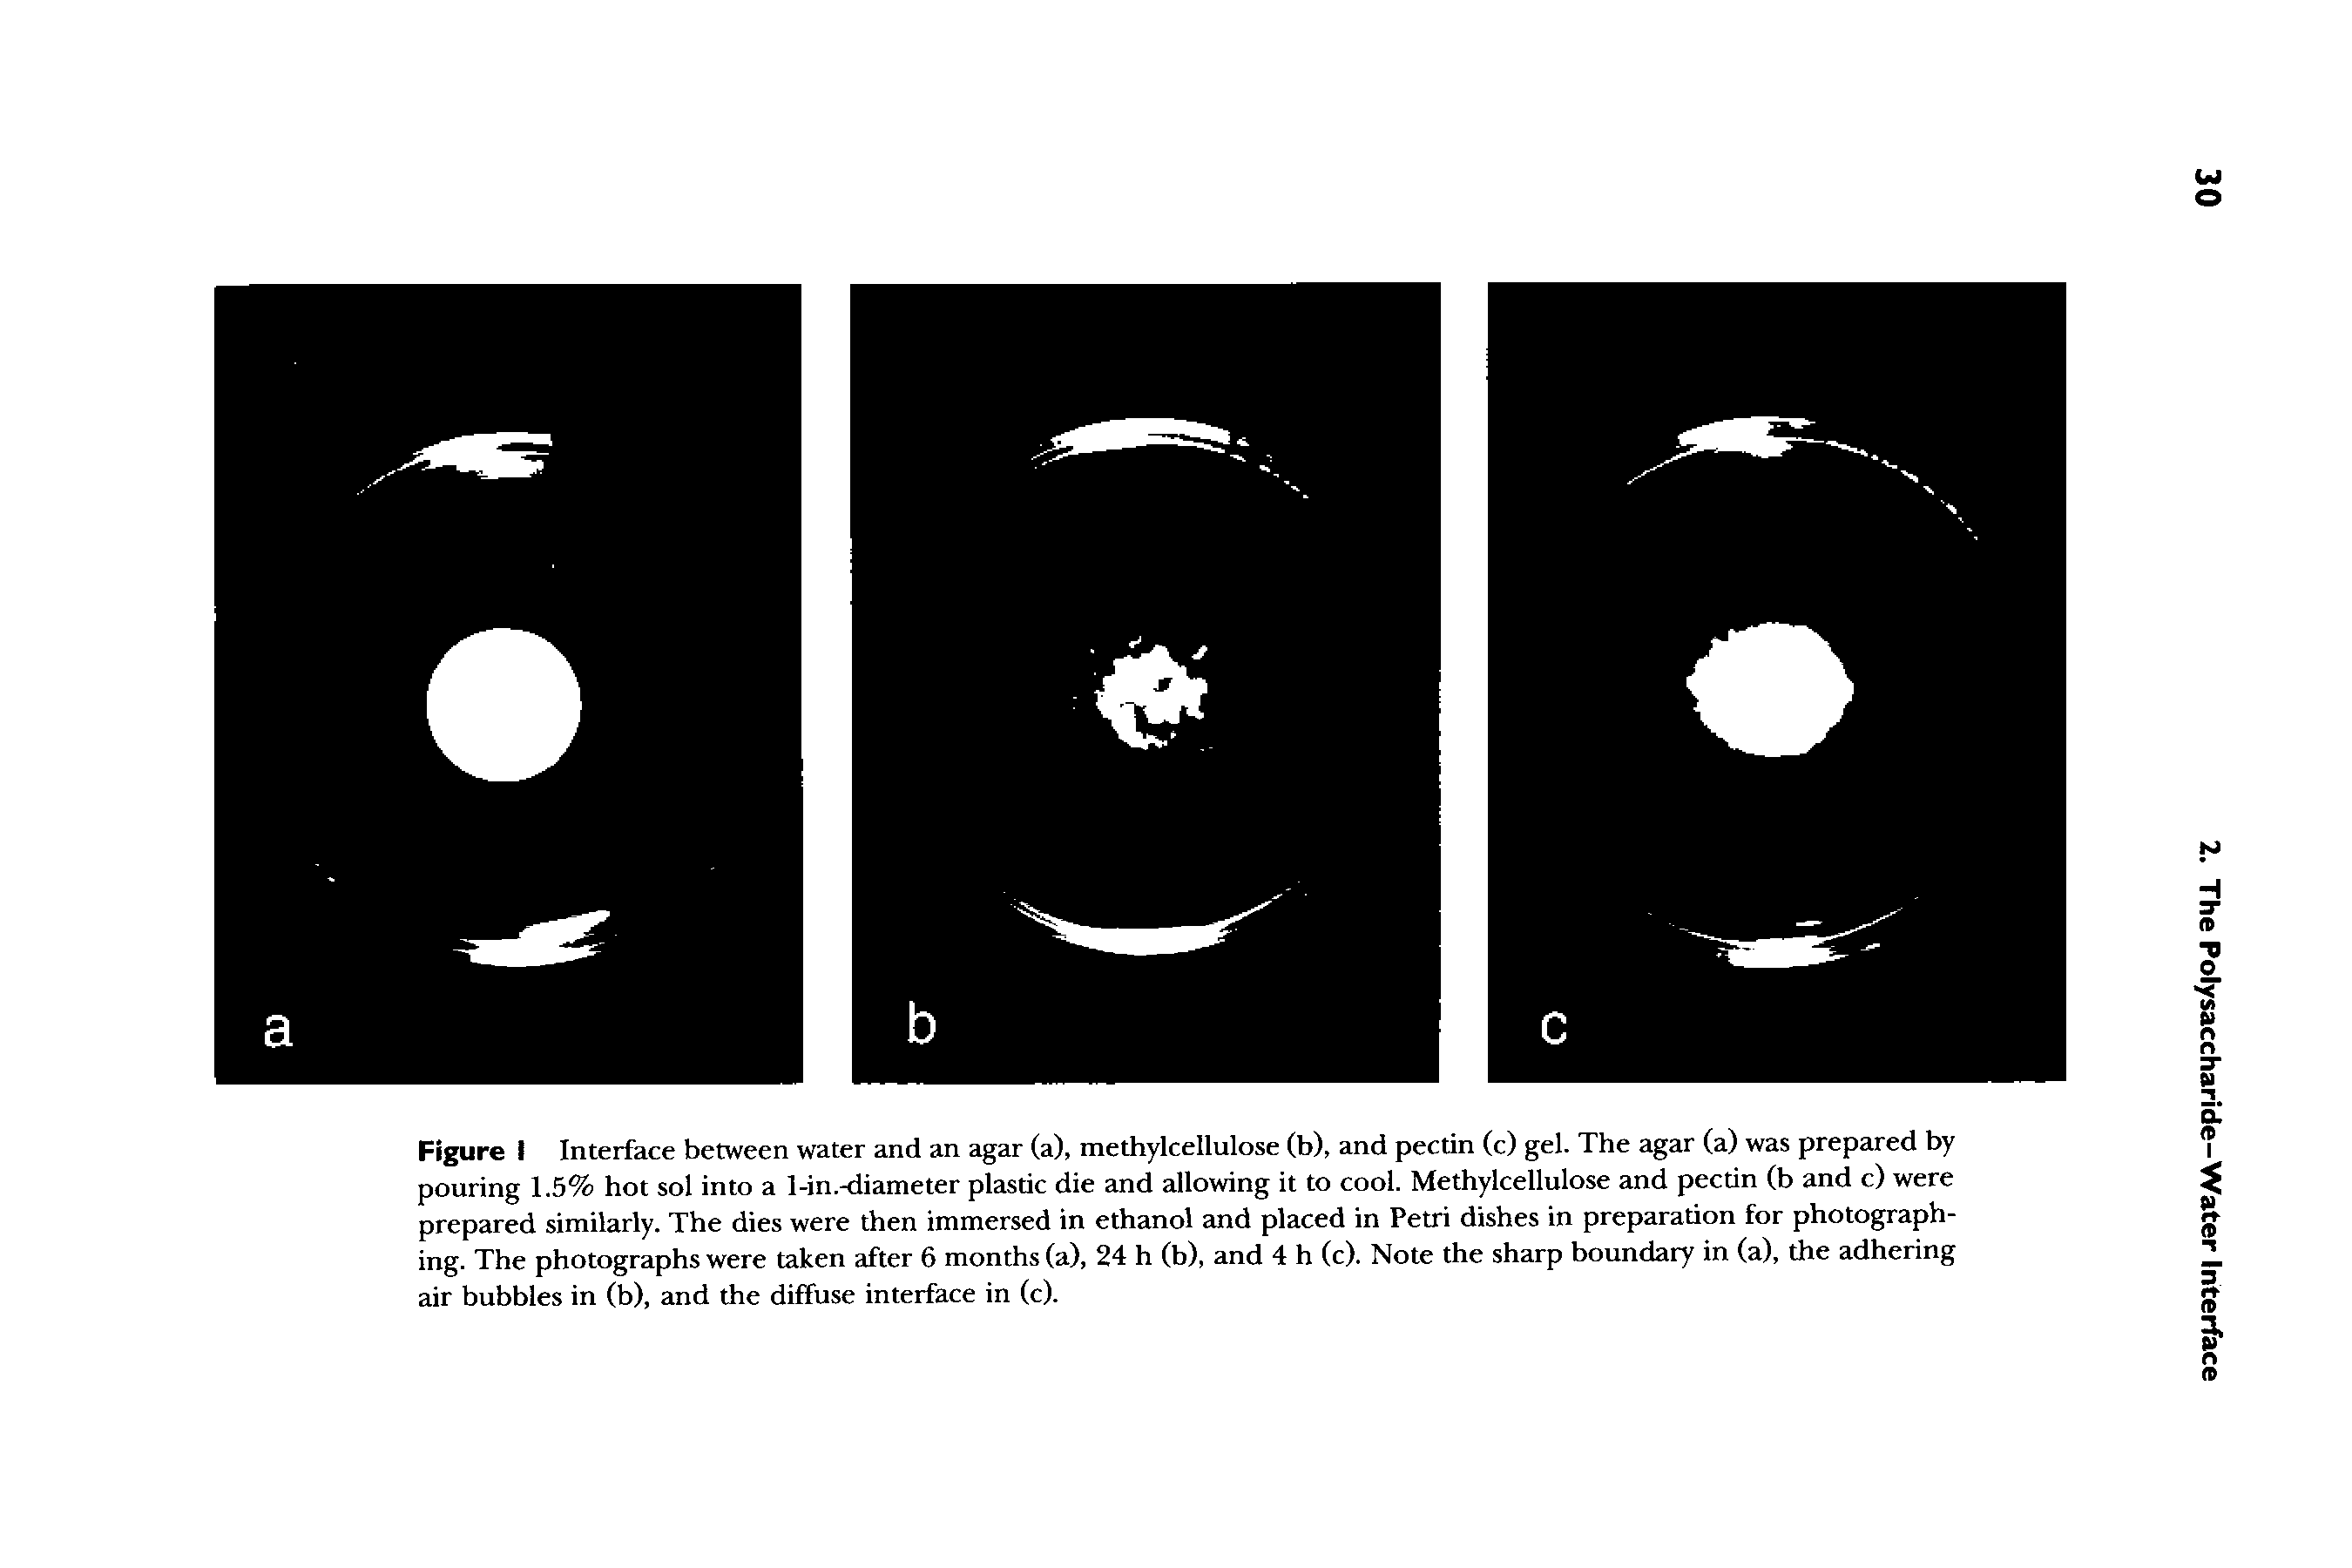 Figure I Interface between water and an agar (a), methylcellulose (b), and pectin (c) gel. The agar (a) was prepared by pouring 1.5% hot sol into a l-in.-diameter plastic die and allowing it to cool. Methylcellulose and pectin (b and c) were prepared similarly. The dies were then immersed in ethanol and placed in Petri dishes in preparation for photographing. The photographs were taken after 6 months (a), 24 h (b), and 4 h (c). Note the sharp boundary in (a), the adhering air bubbles in (b), and the diffuse interface in (c).